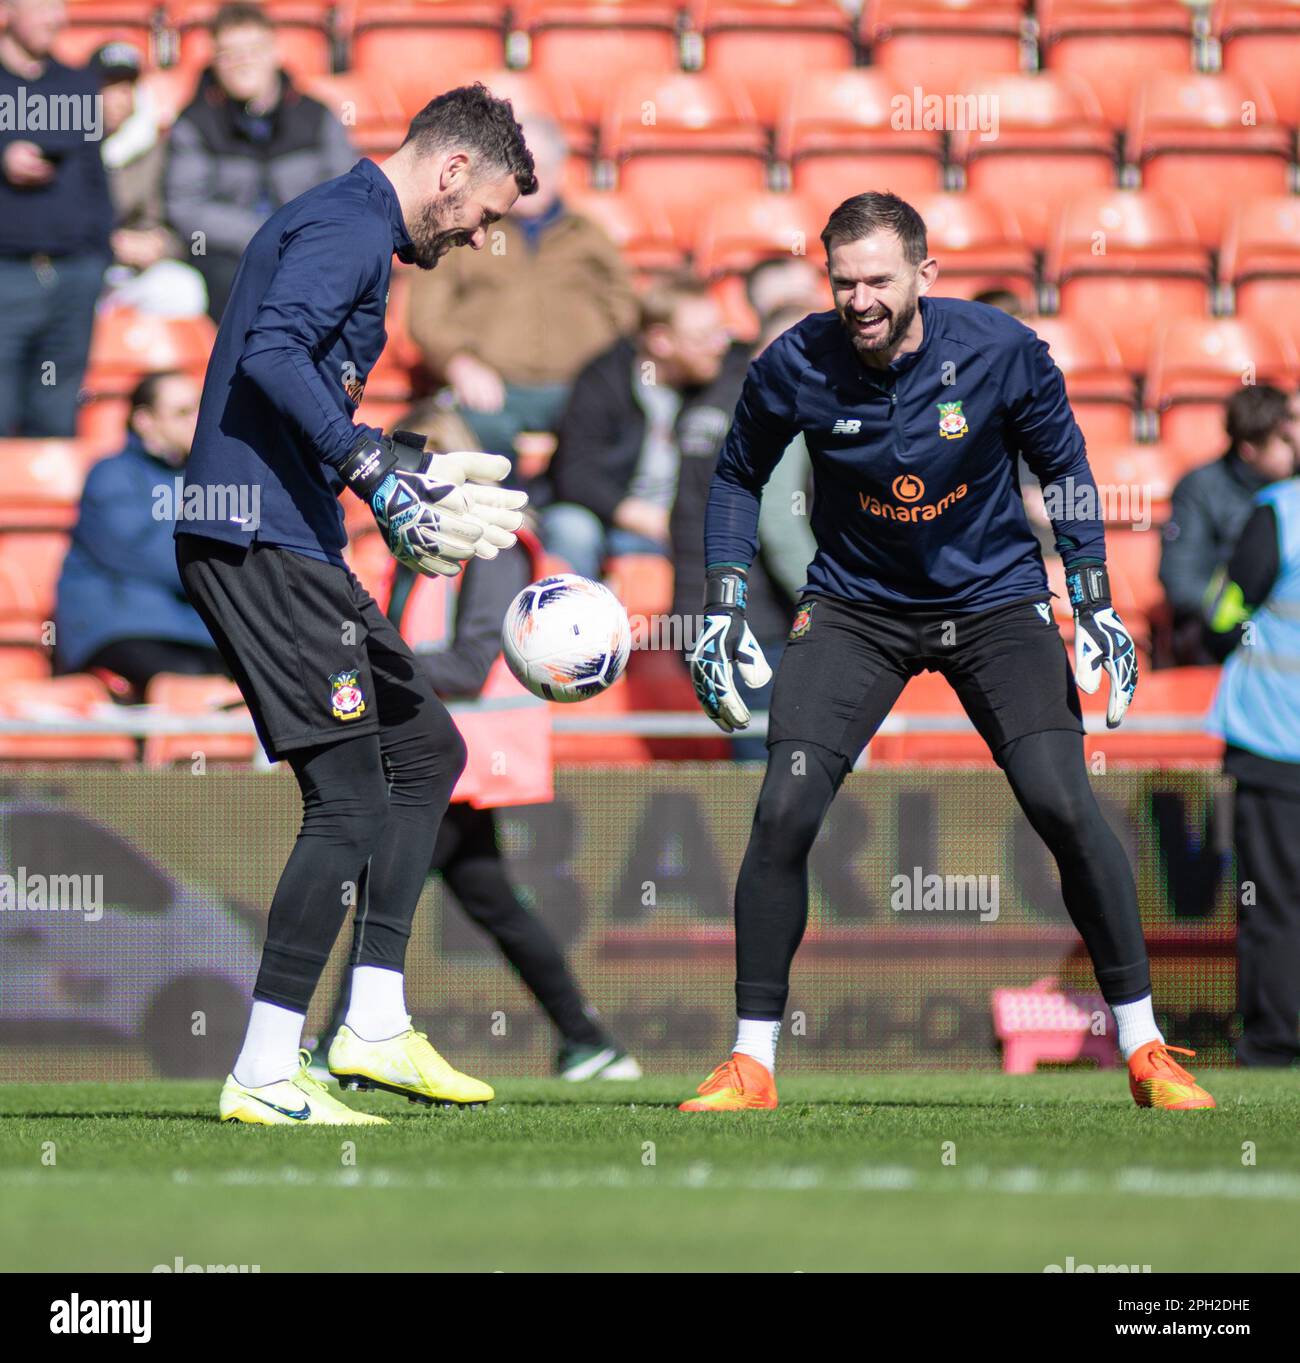 Wrexham new signing Ben Foster and Wrexham's Mark Howard warm up, during Wrexham Association Football Club V York City Football Club at The Racecourse Ground, in in the Vanarama National League. (Credit Image: ©Cody Froggatt/Alamy Live News) Stock Photo